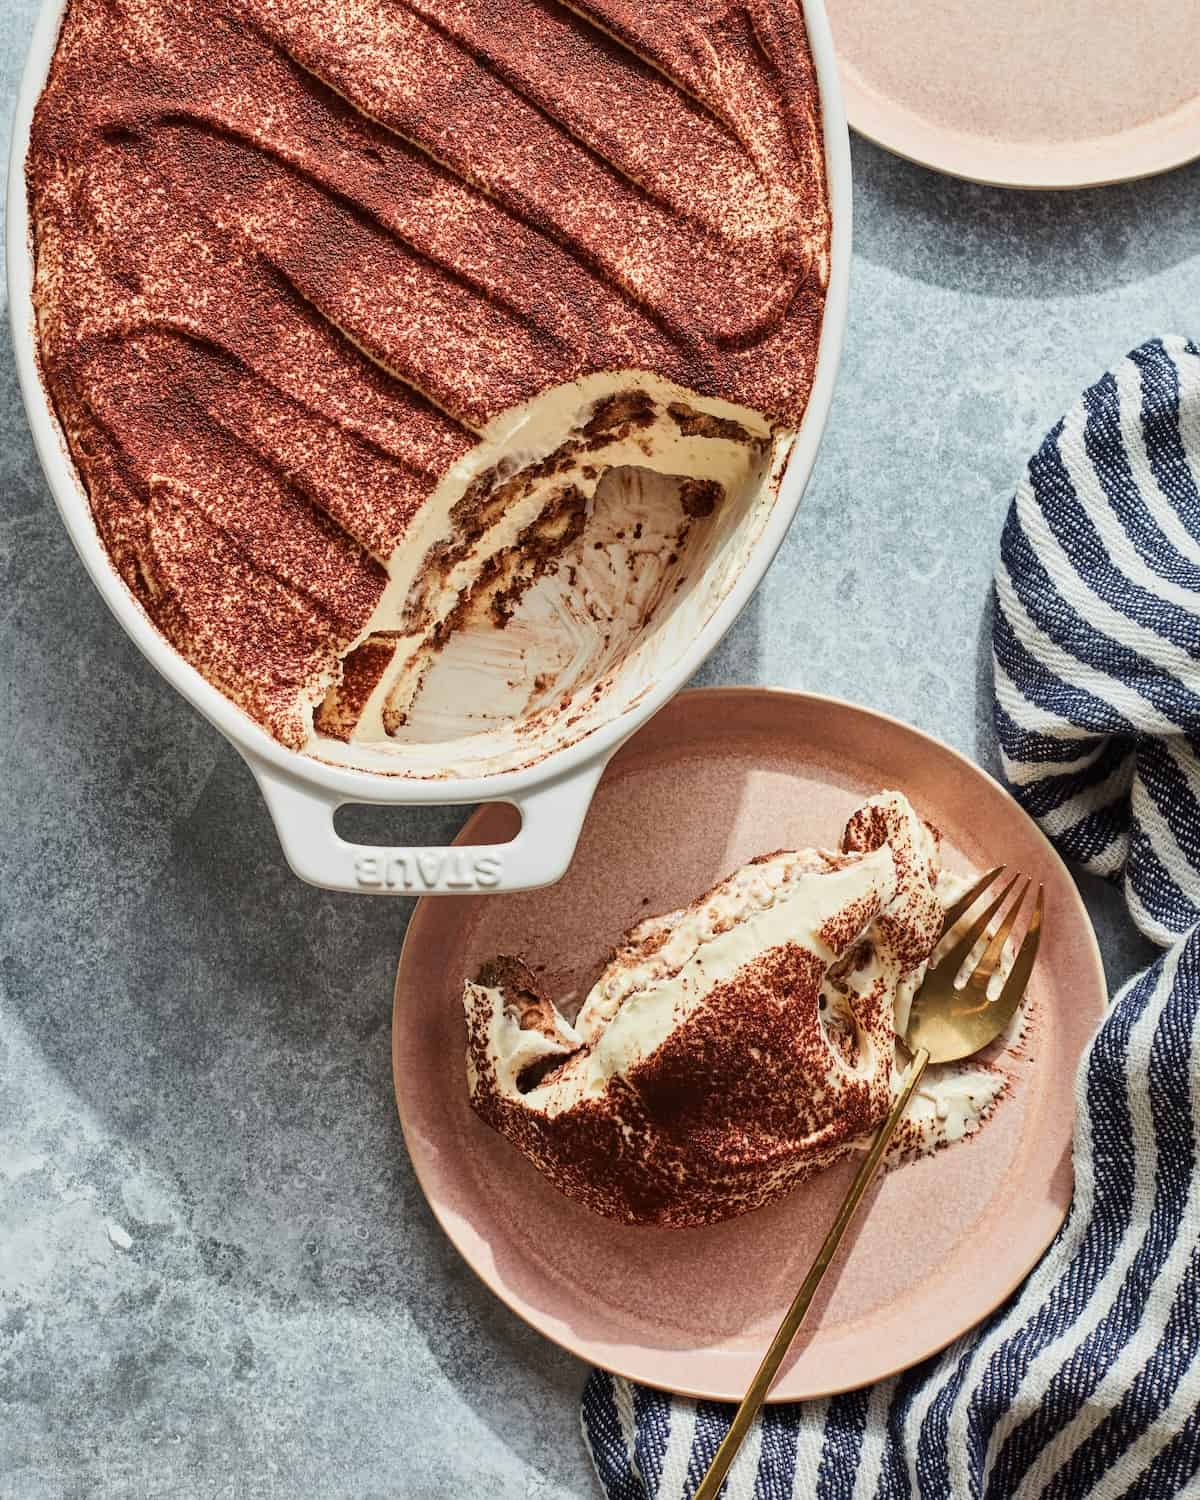 A white oval dish with tiramisu, one corner of which has been served into a small ceramic pink plate on the side, with a golden fork in the plate, with a navy and white striped kitchen towel on the side.